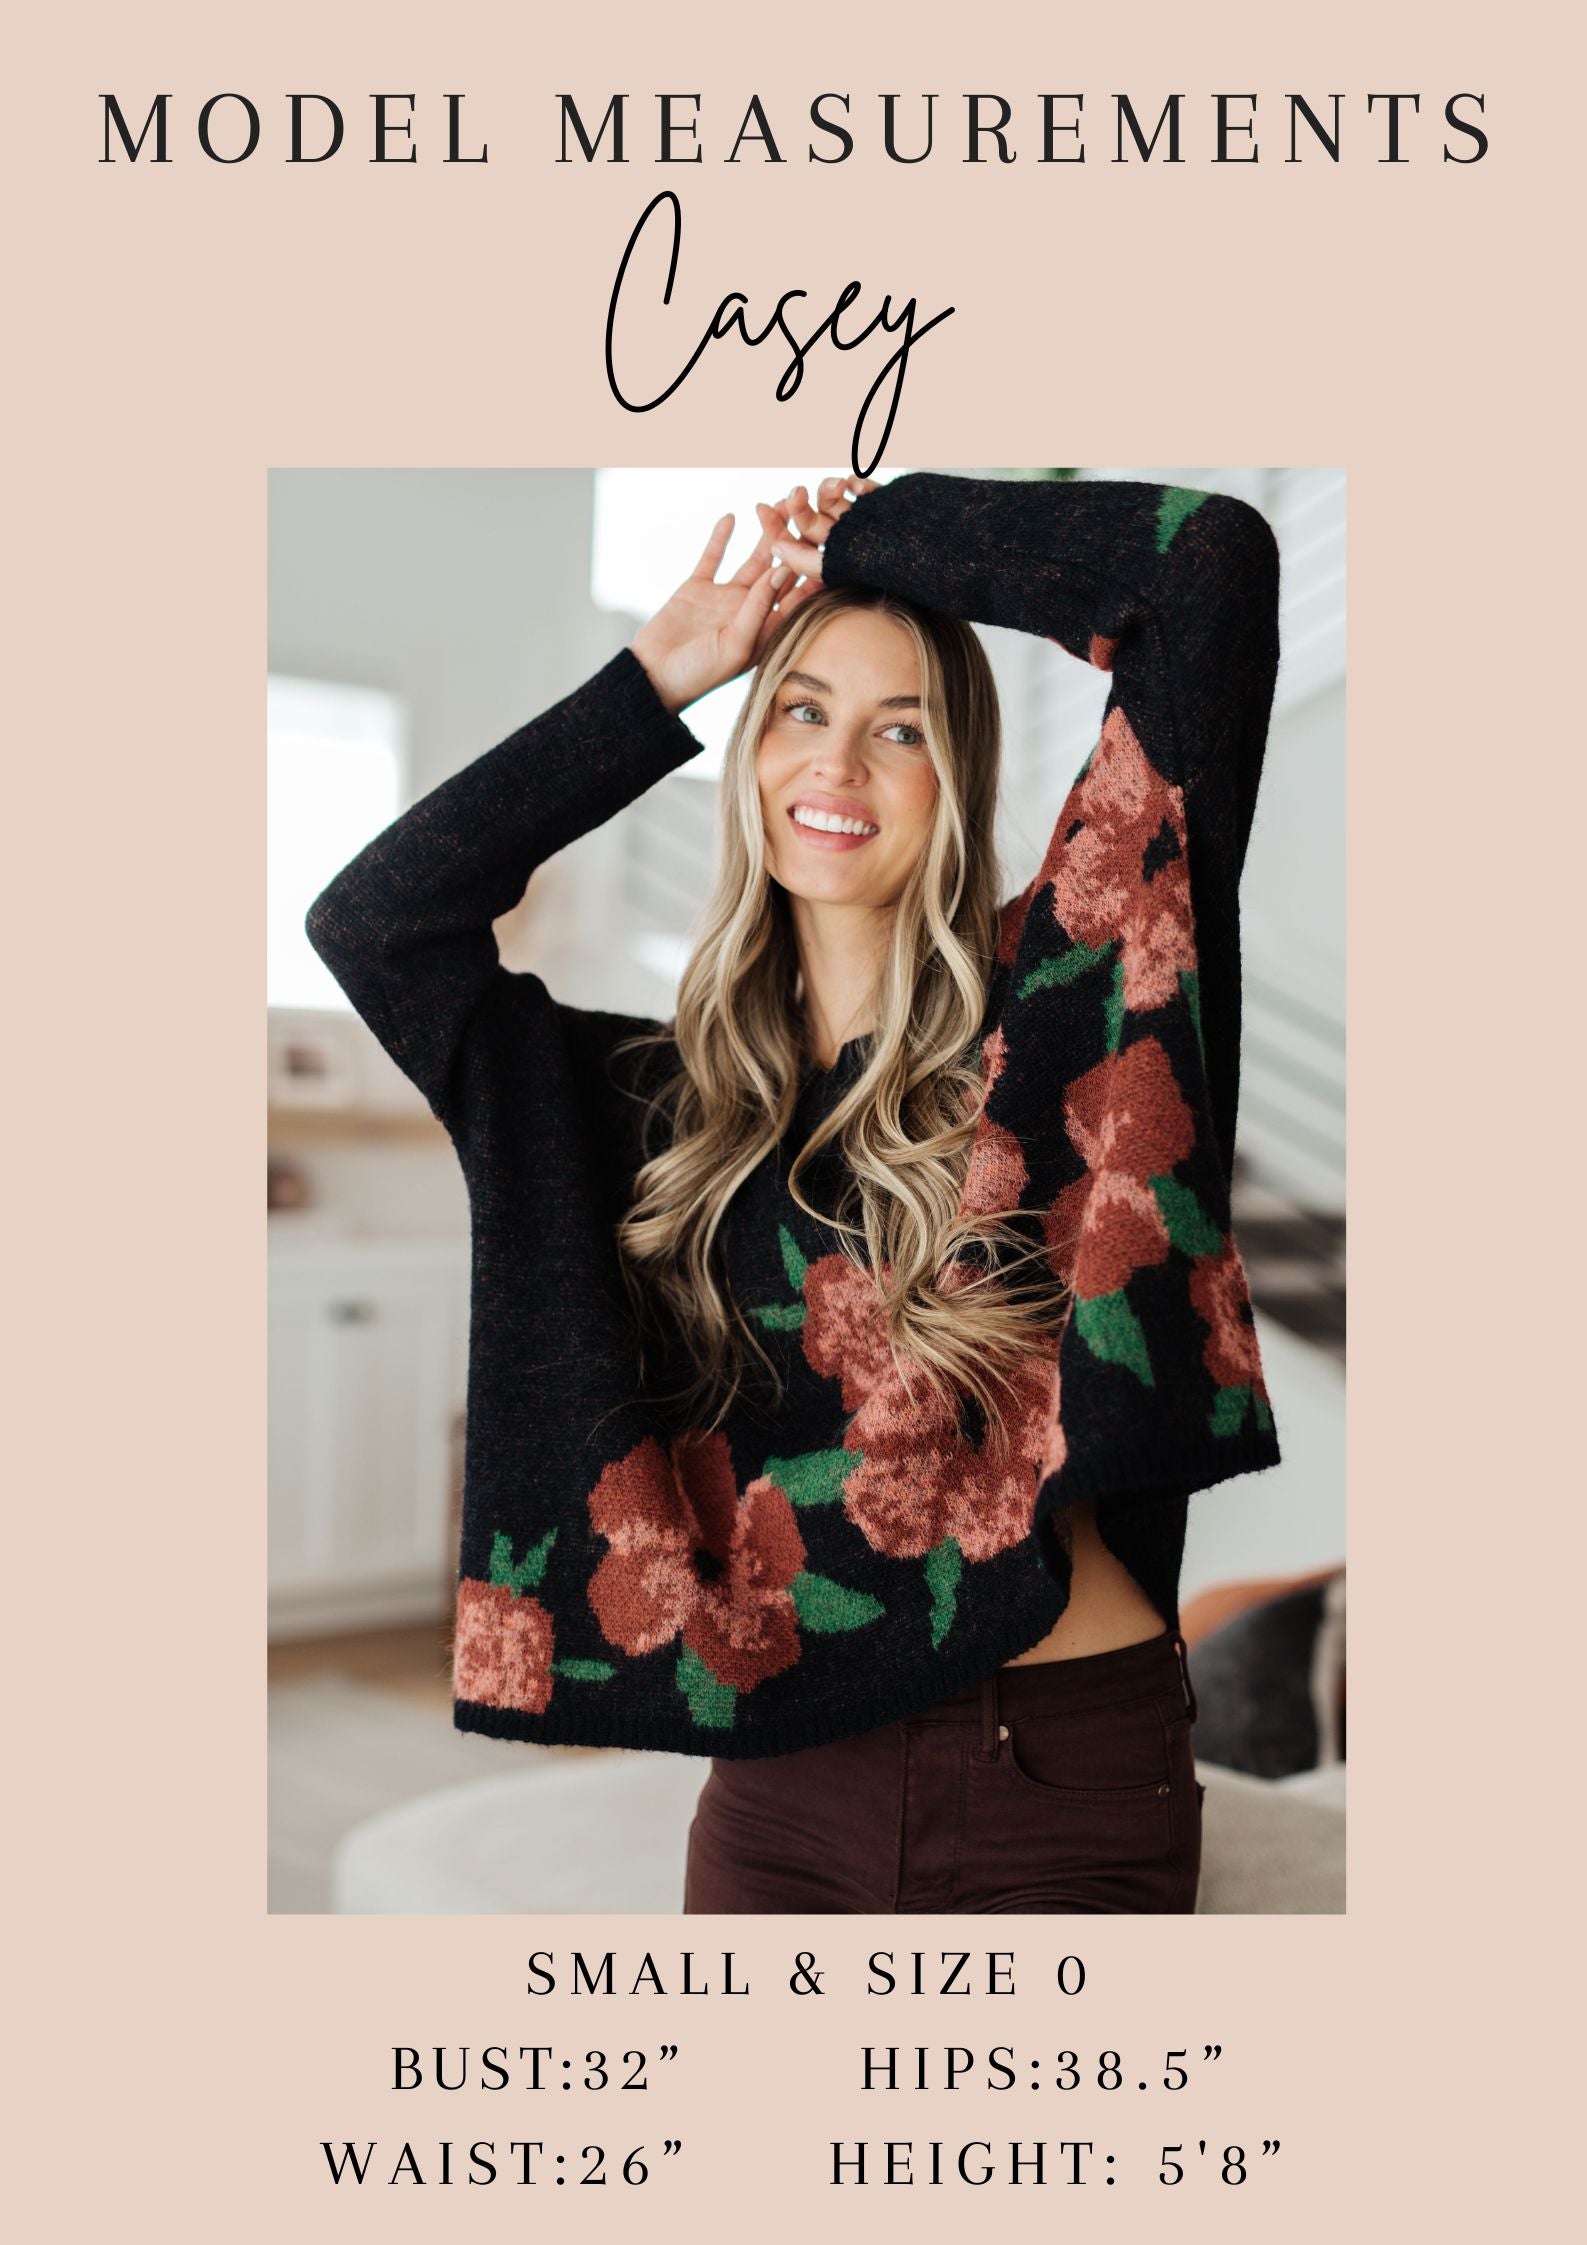 Lizzy Top in Pink and Aqua Ditsy Floral-Long Sleeve Tops-Krush Kandy, Women's Online Fashion Boutique Located in Phoenix, Arizona (Scottsdale Area)